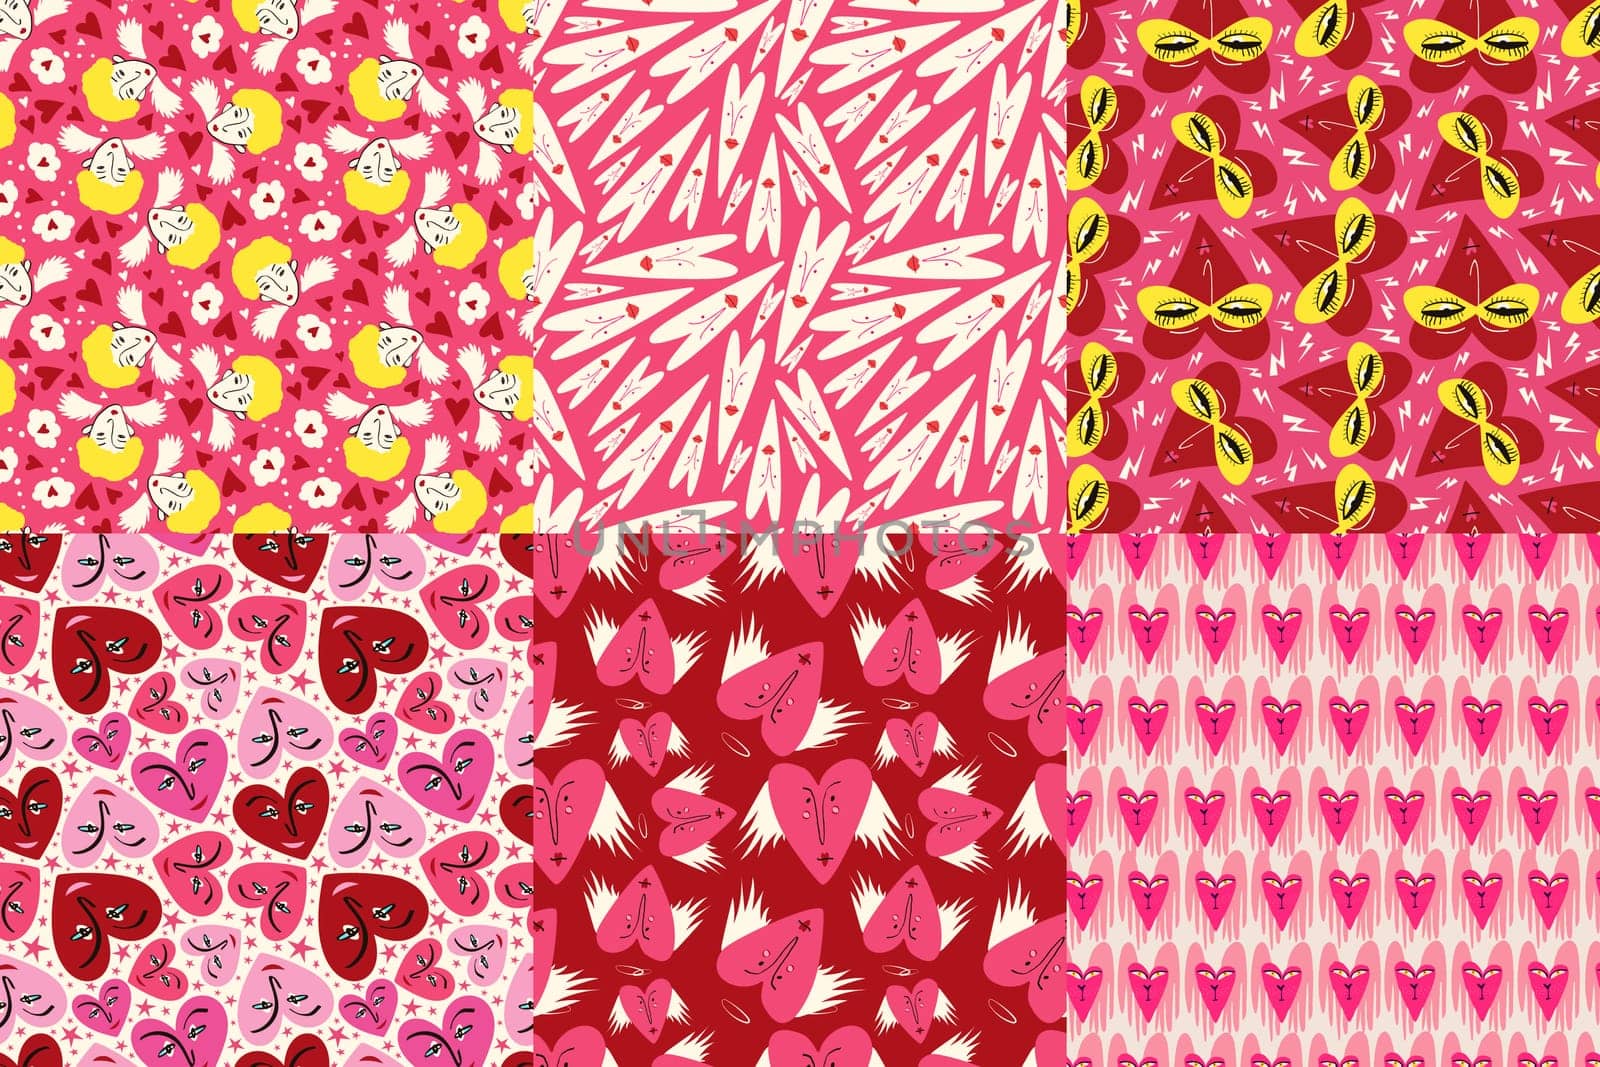 Valentines Day set of Bright and Cool Seamless Patterns. Pattern with Cool Quirky Playful Bright Hearts and characters